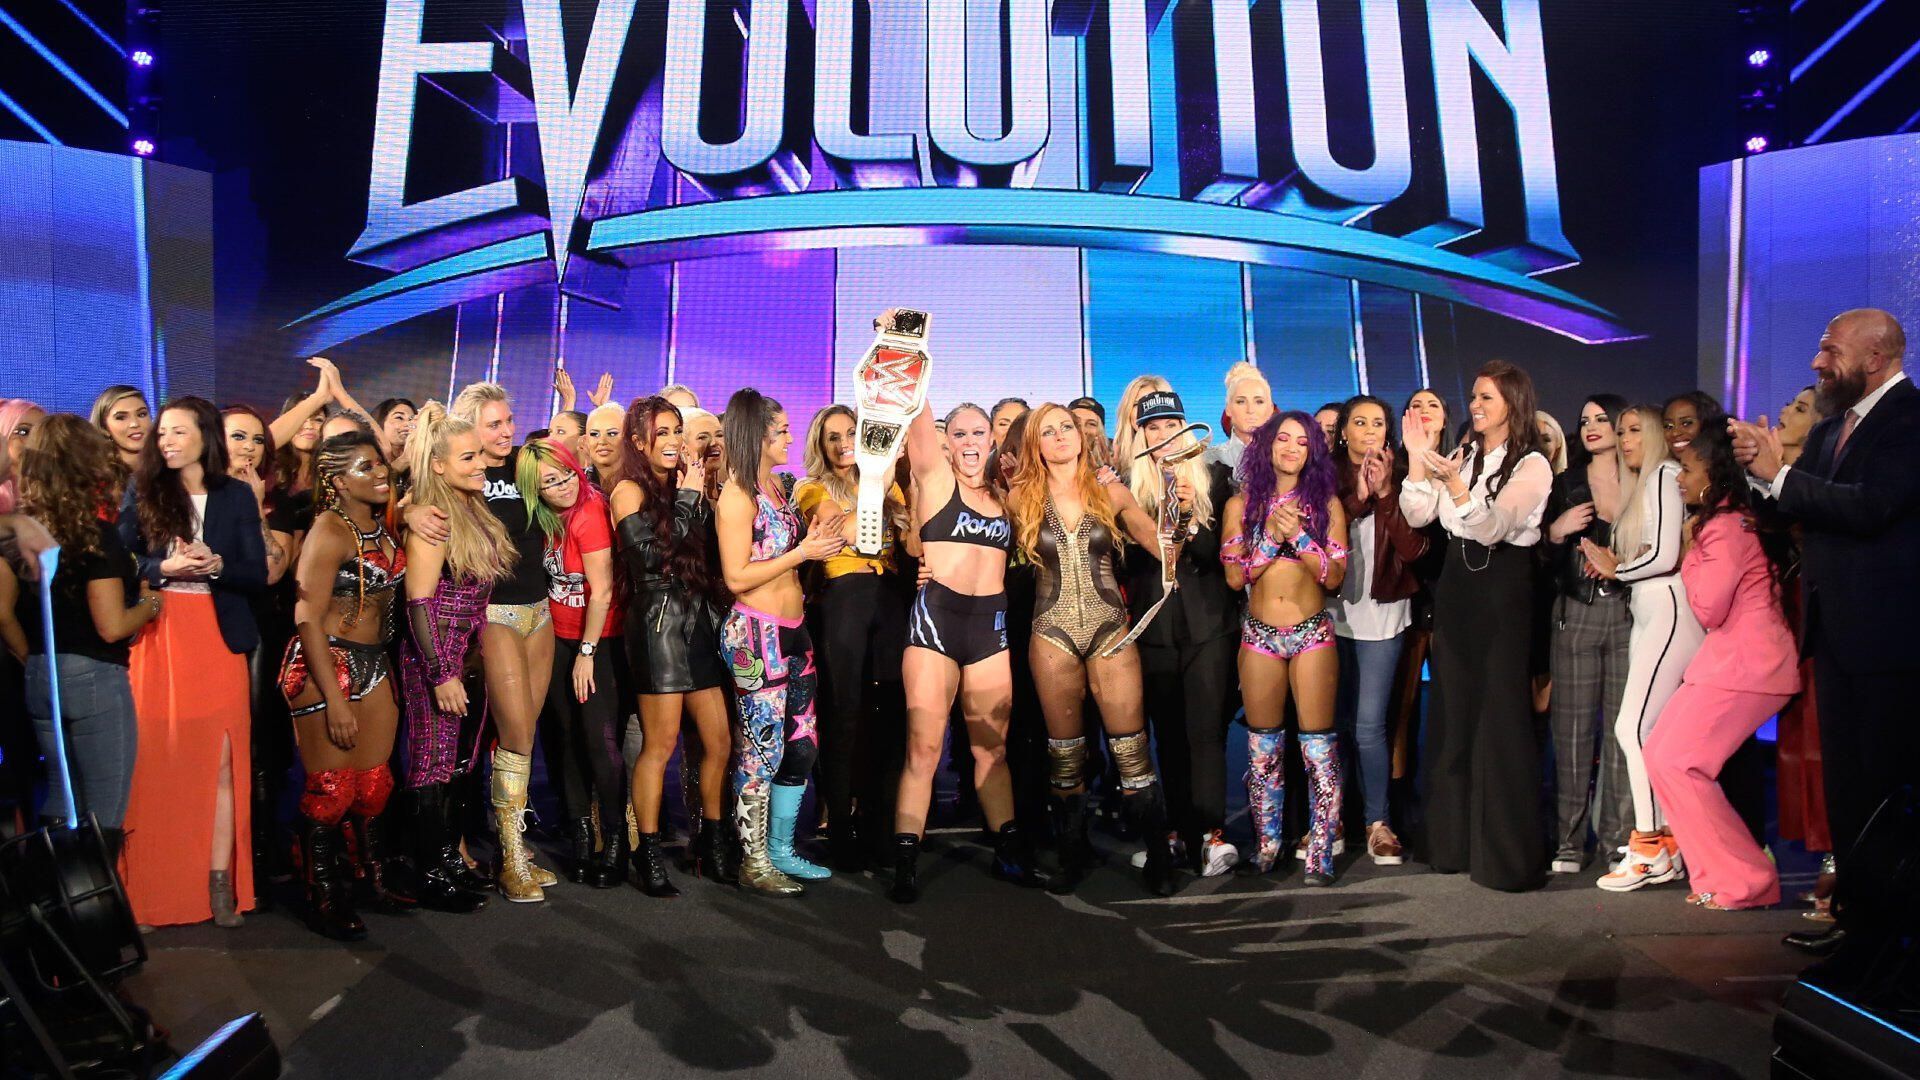 WWE Evolution took place on October 28, 2018 at the Nassau Veterans Memorial Coliseum in Uniondale, New York